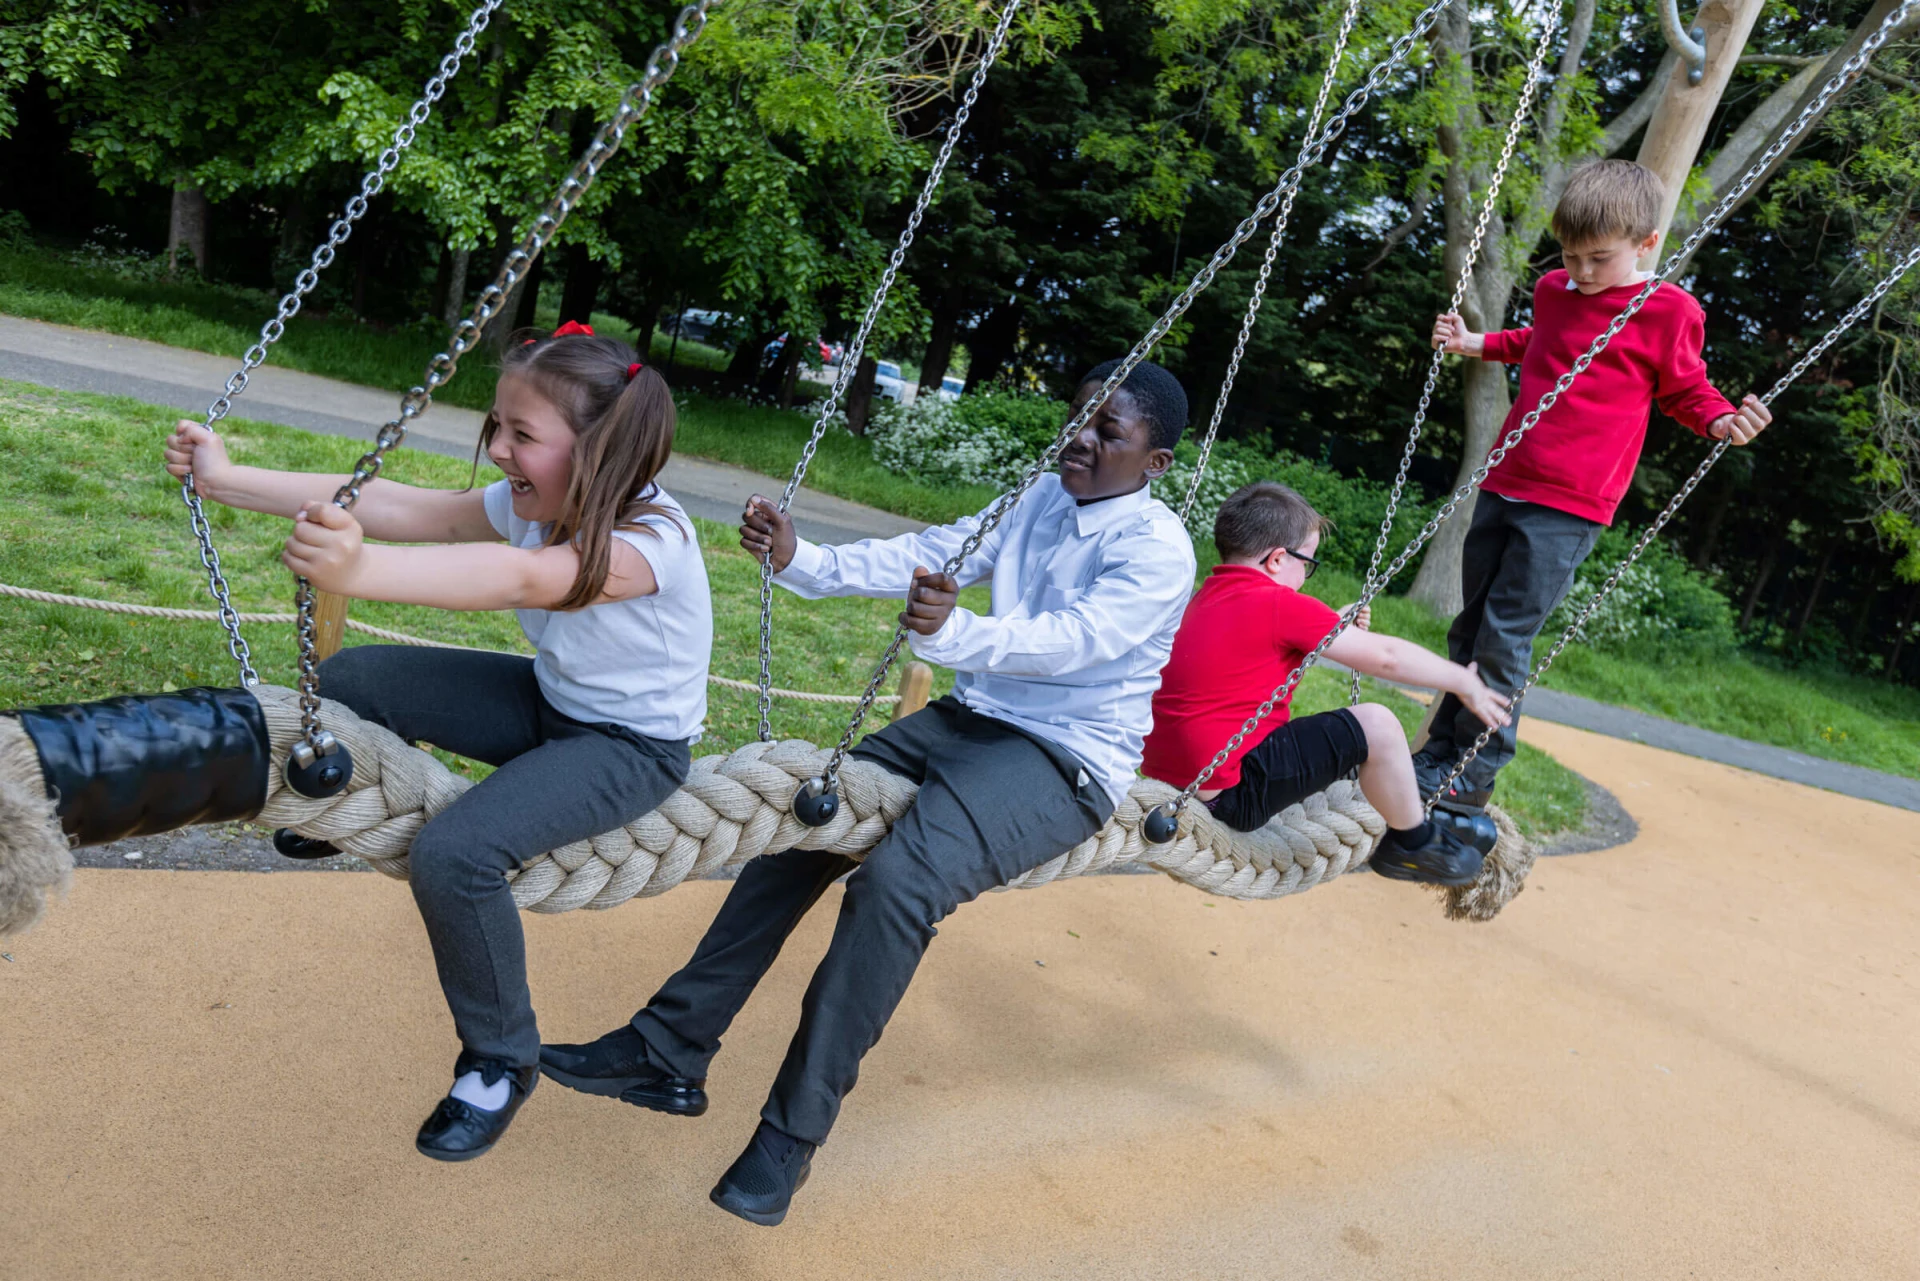 children playing on special education needs playground equipment